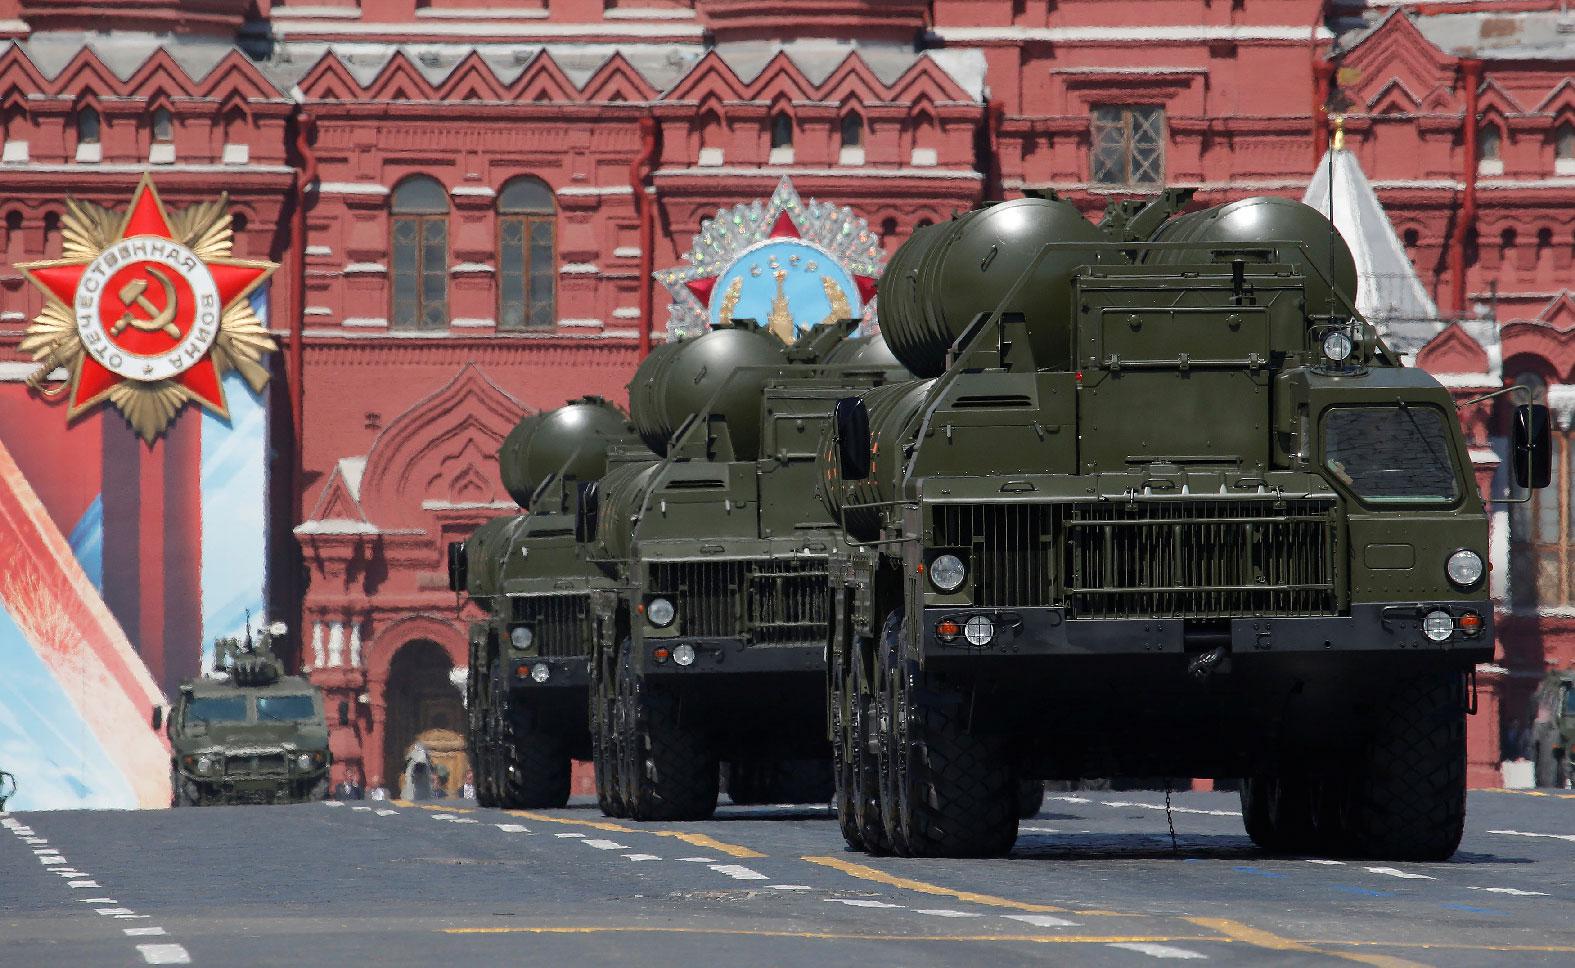 Russian S-400 Triumph medium-range and long-range surface-to-air missile systems drive during the Victory Day parade, marking the 71st anniversary of the victory over Nazi Germany in World War Two, at Red Square in Moscow, Russia, May 9, 2016.